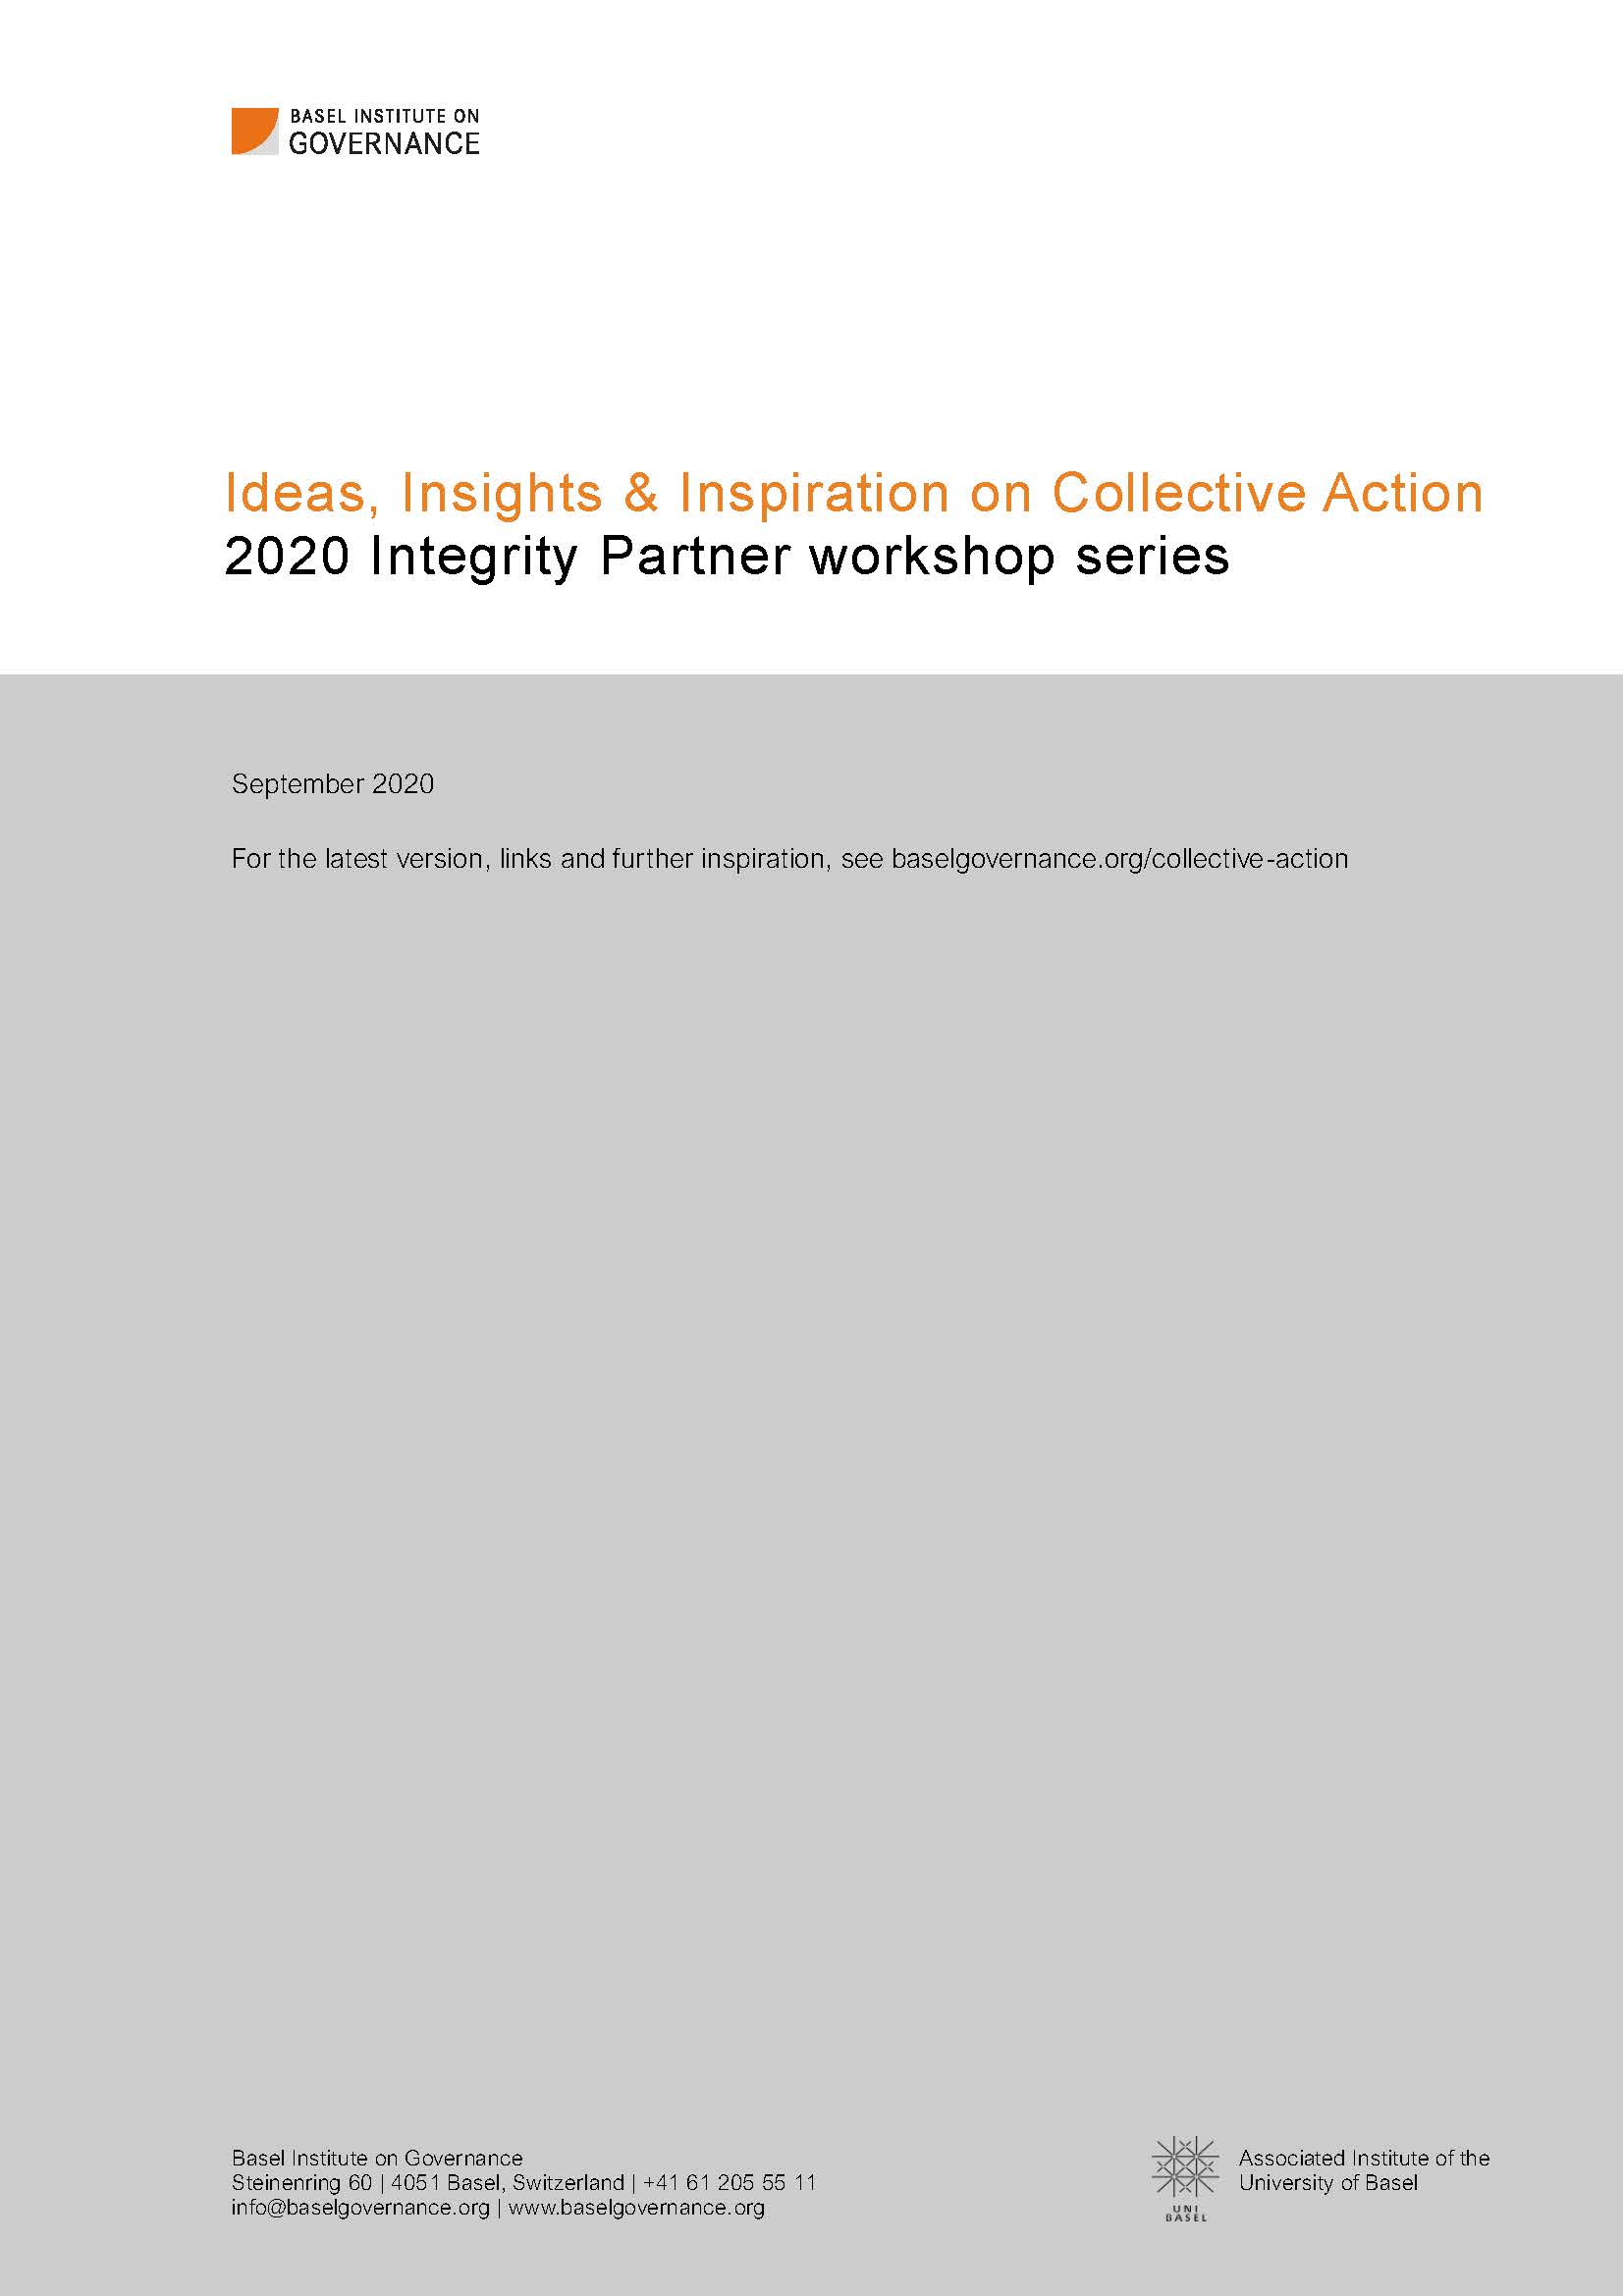 Cover page of Collective Action ideas, insights and inspiration